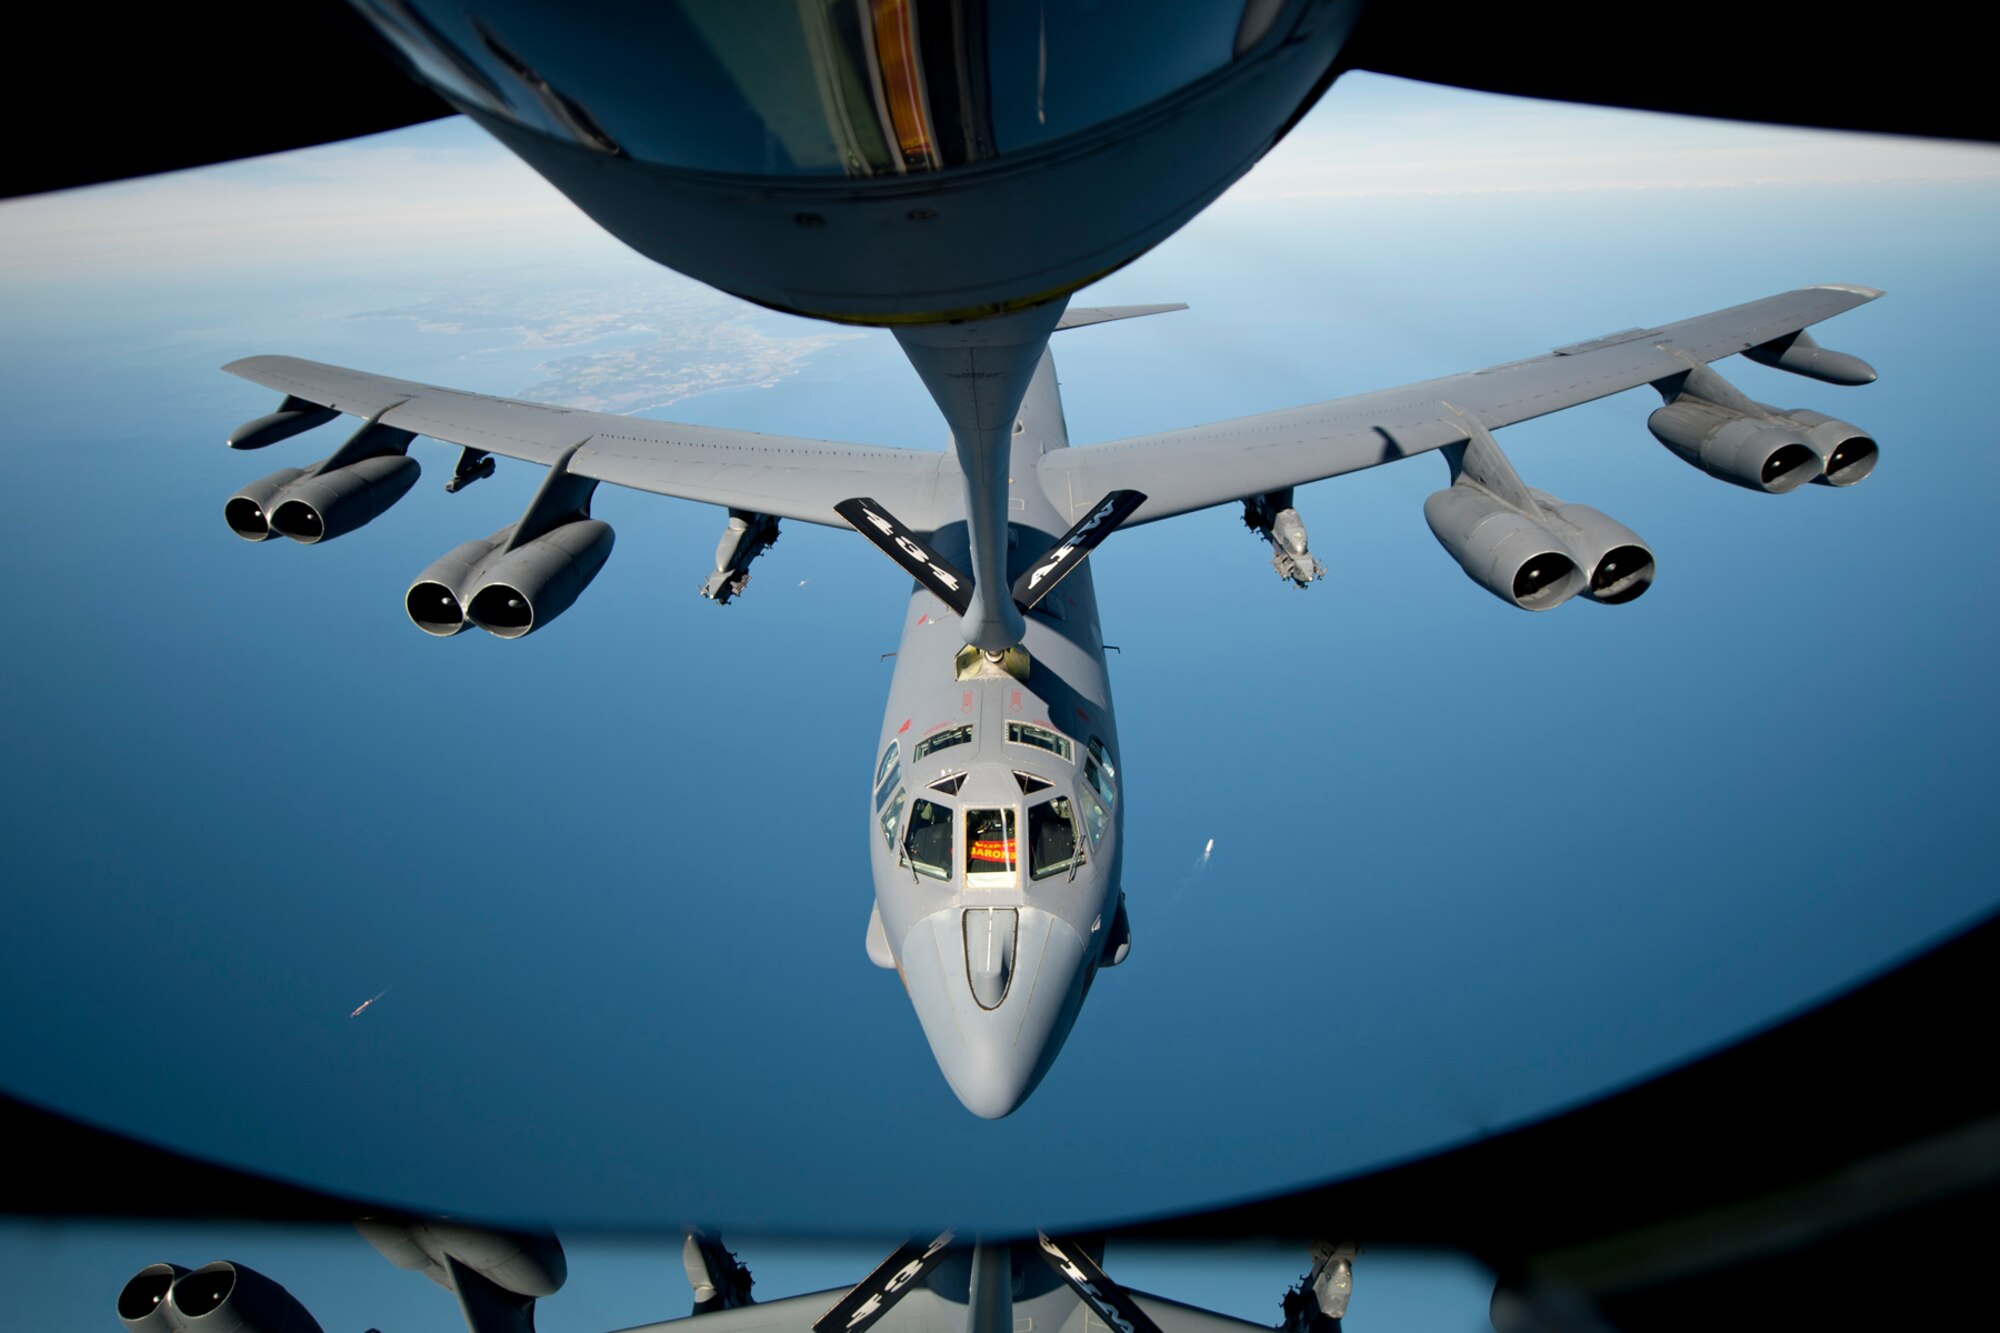 A B-52 Stratofortress from Minot Air Force Base, N.D., is refueled by a KC-135 Stratotanker from the 434th Air Refueling Wing, Grissom Air Reserve Base, Ind., during Baltic Operations 2016 over the Baltic Sea, June 9, 2016. The KC-135s flew 30 sorties; 95 flying hours off-loading 953 pounds of JP8 fuel to U.S. jets and Polish F-16s, totaling 93 receivers, 27 of which were Polish. (U.S. Air Force photo/Senior Airman Erin Babis)